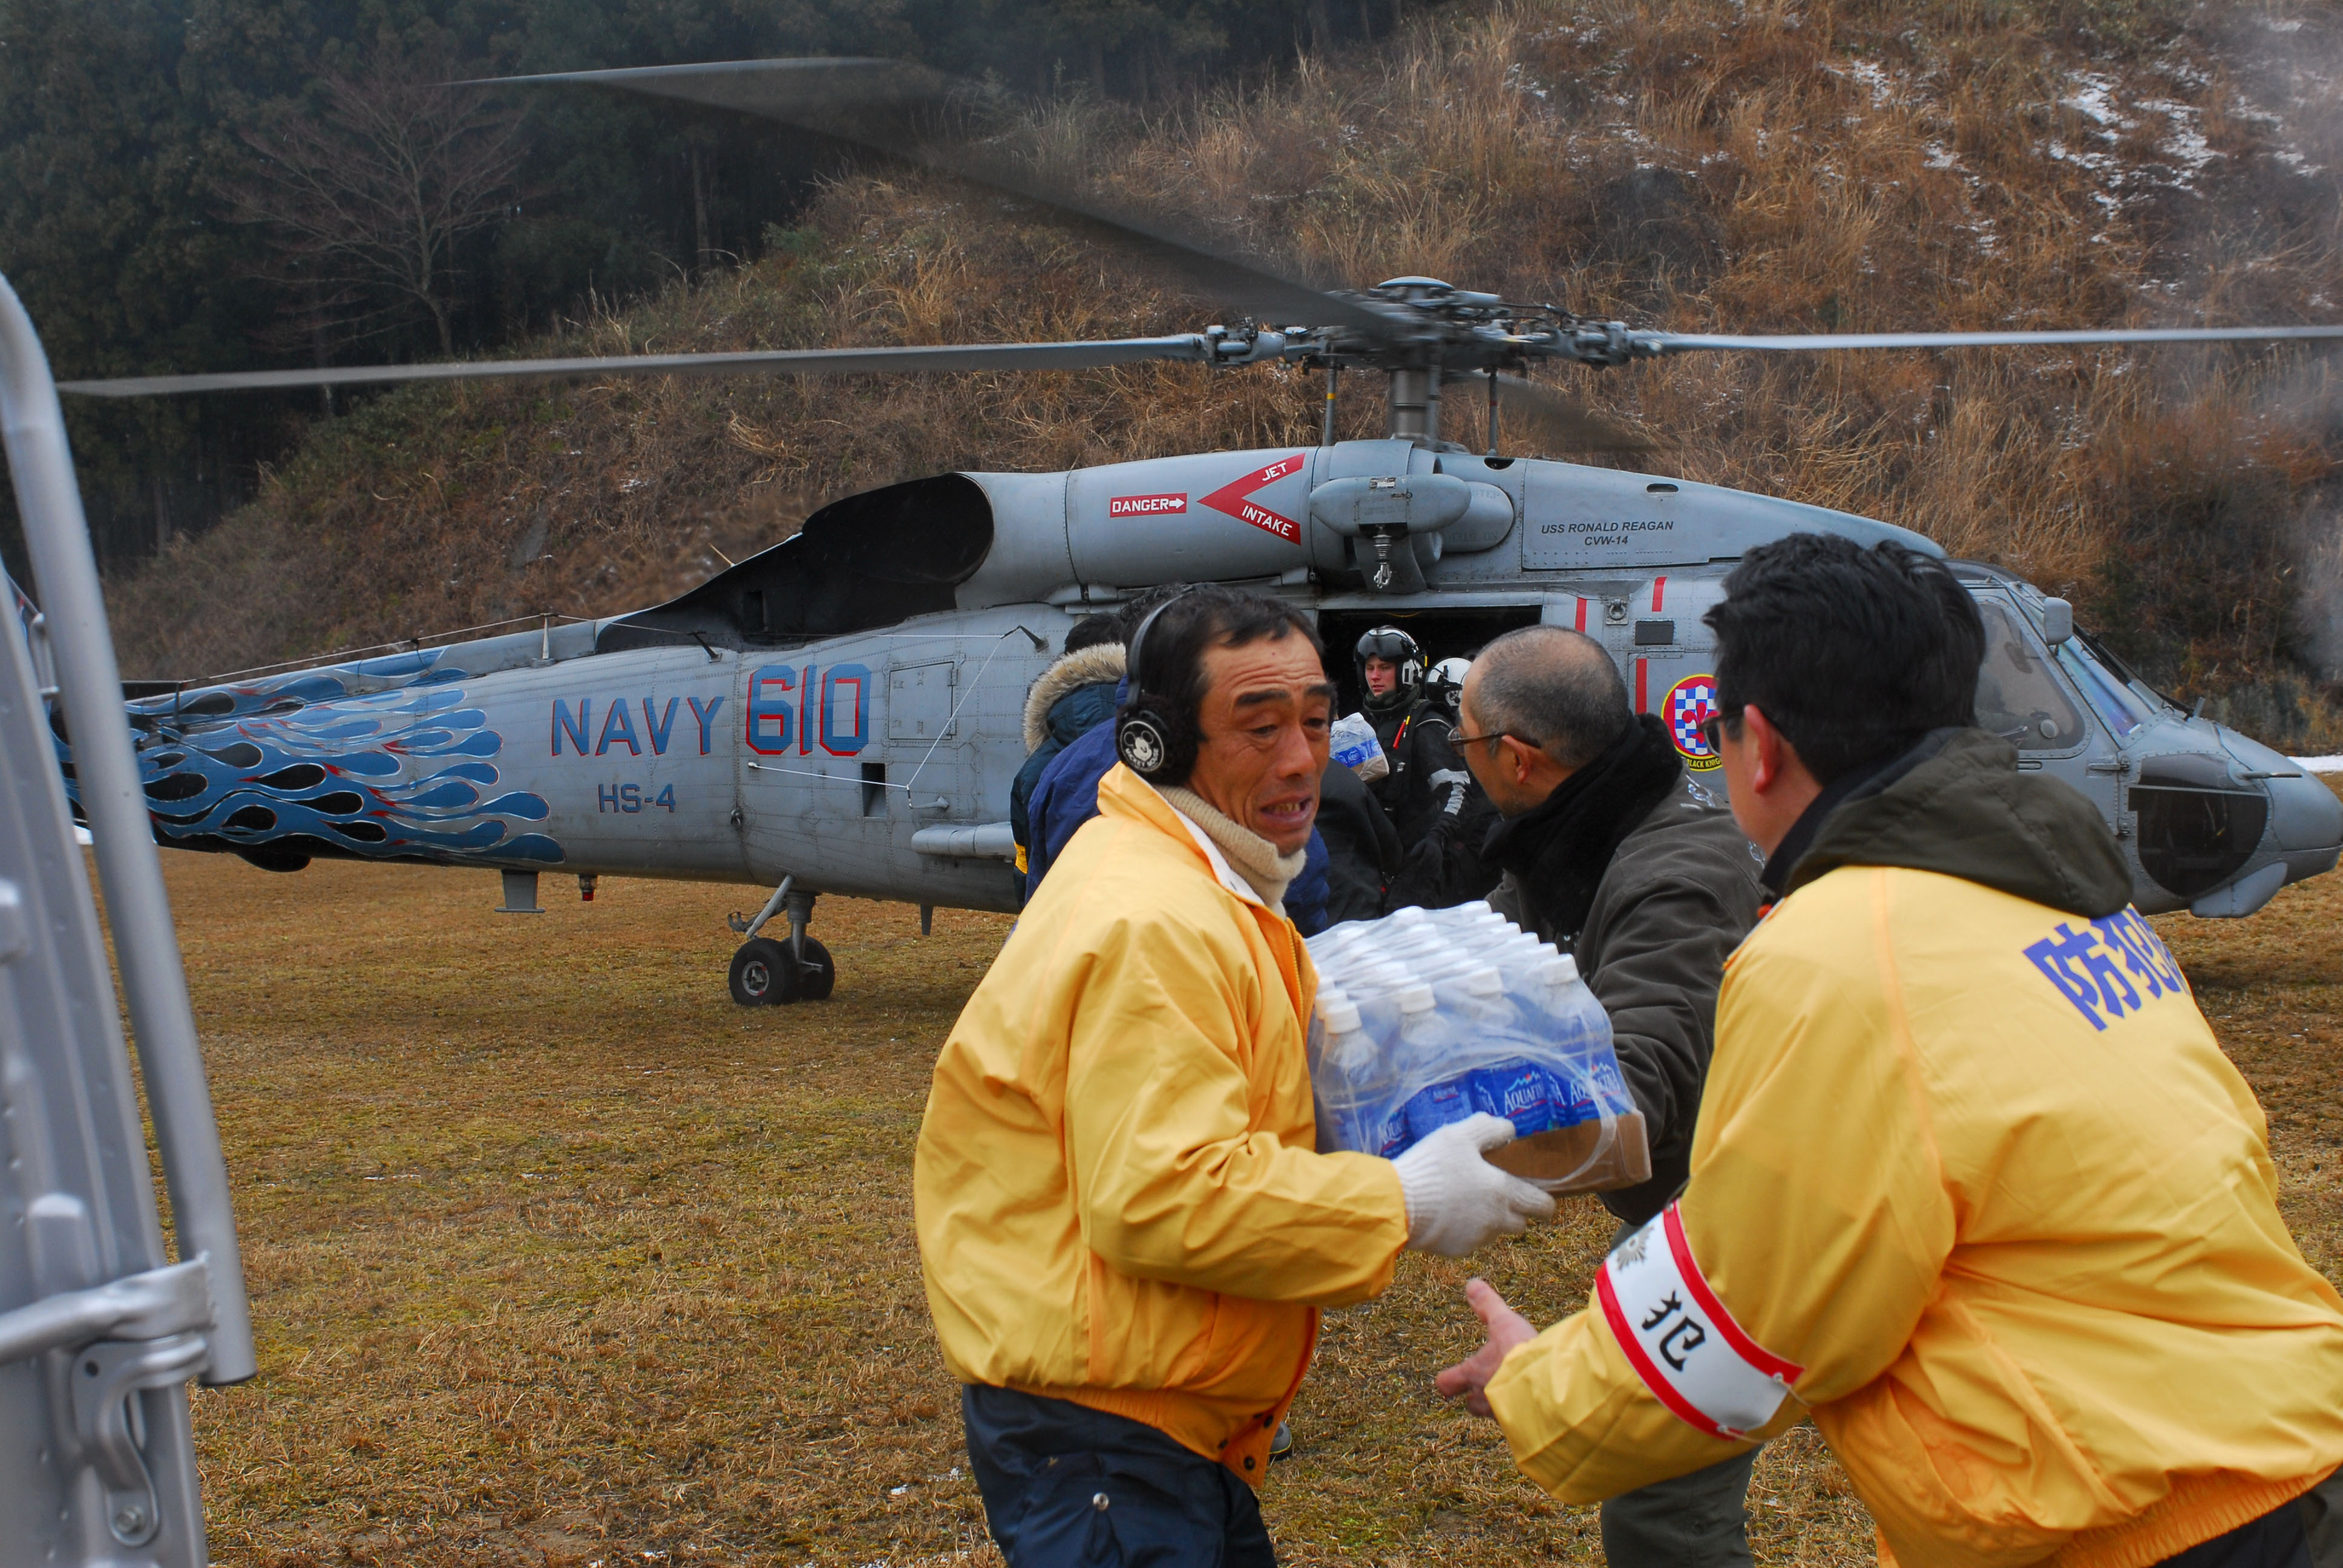 U.S. aircrew deliver supplies to Japan